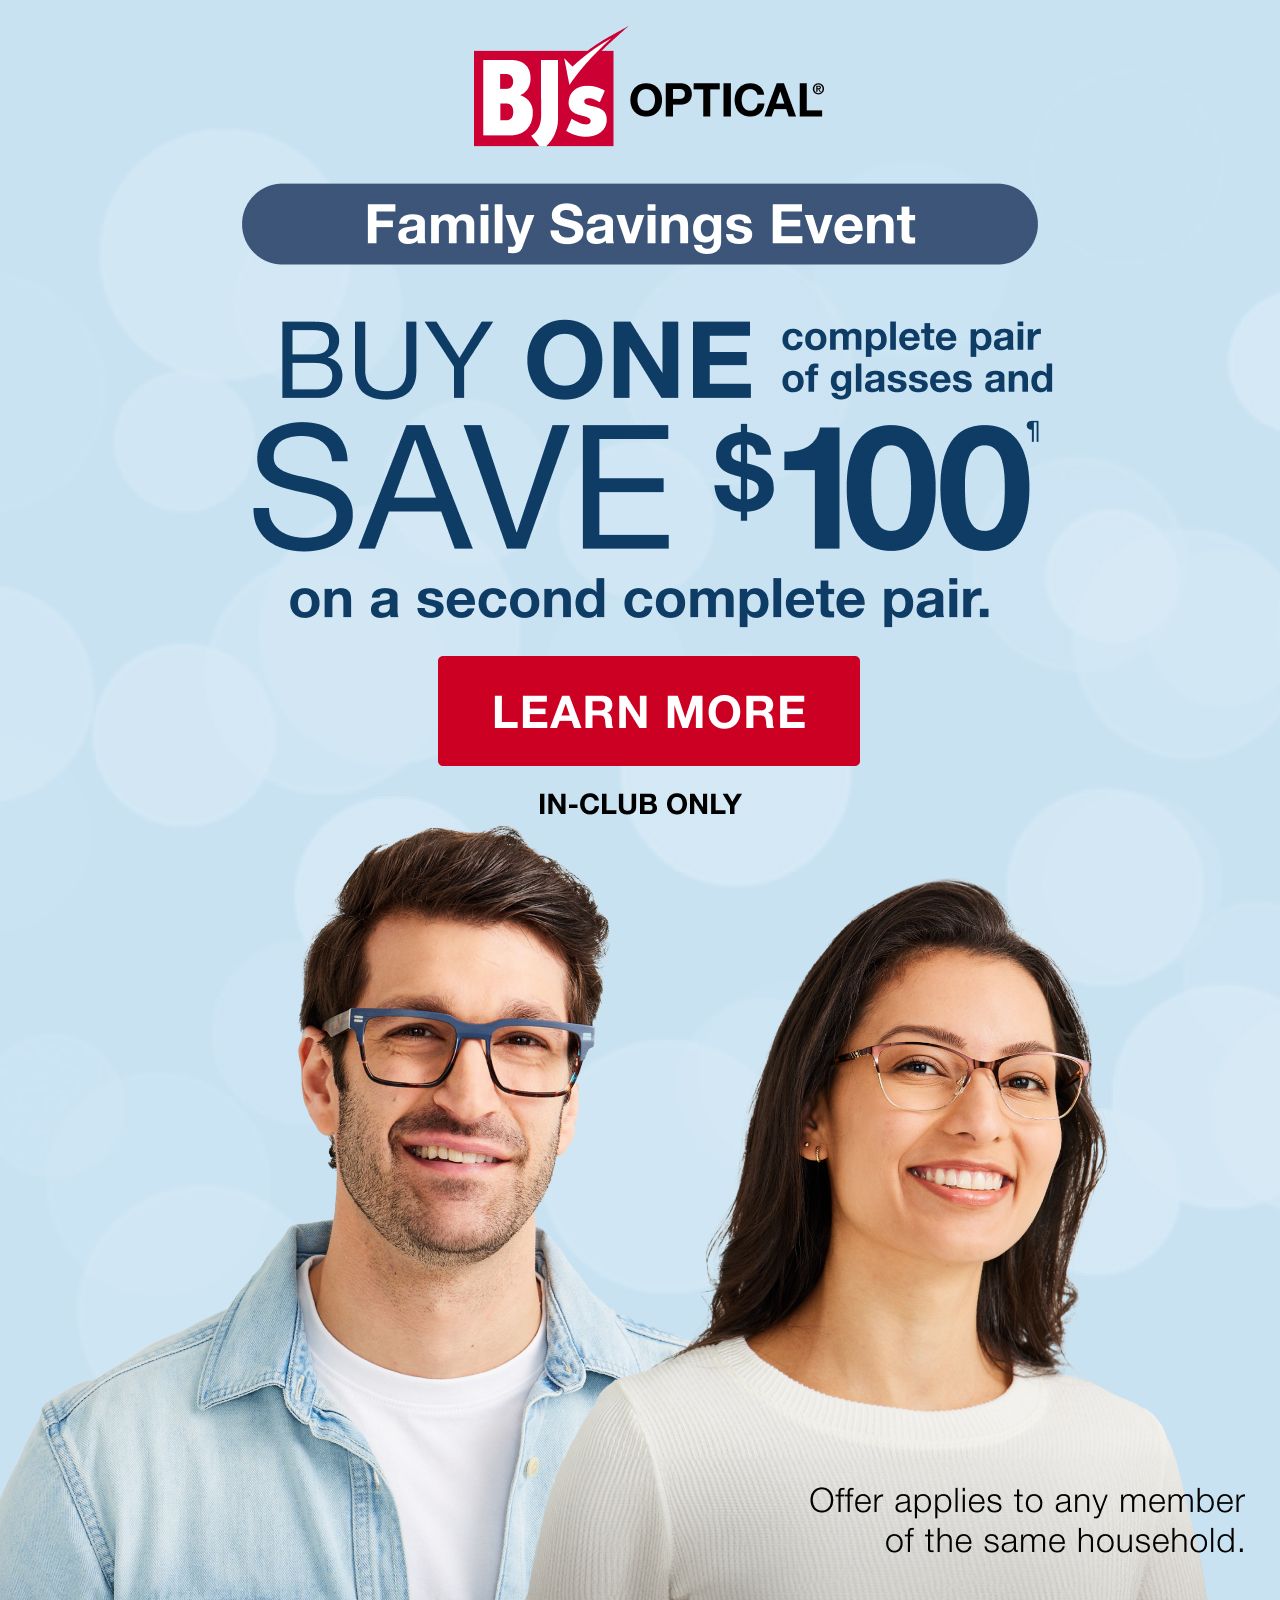 BJ's Optical®. Buy One, save $100 on a second complete pair of glasses. In-club only. Click here to learn more